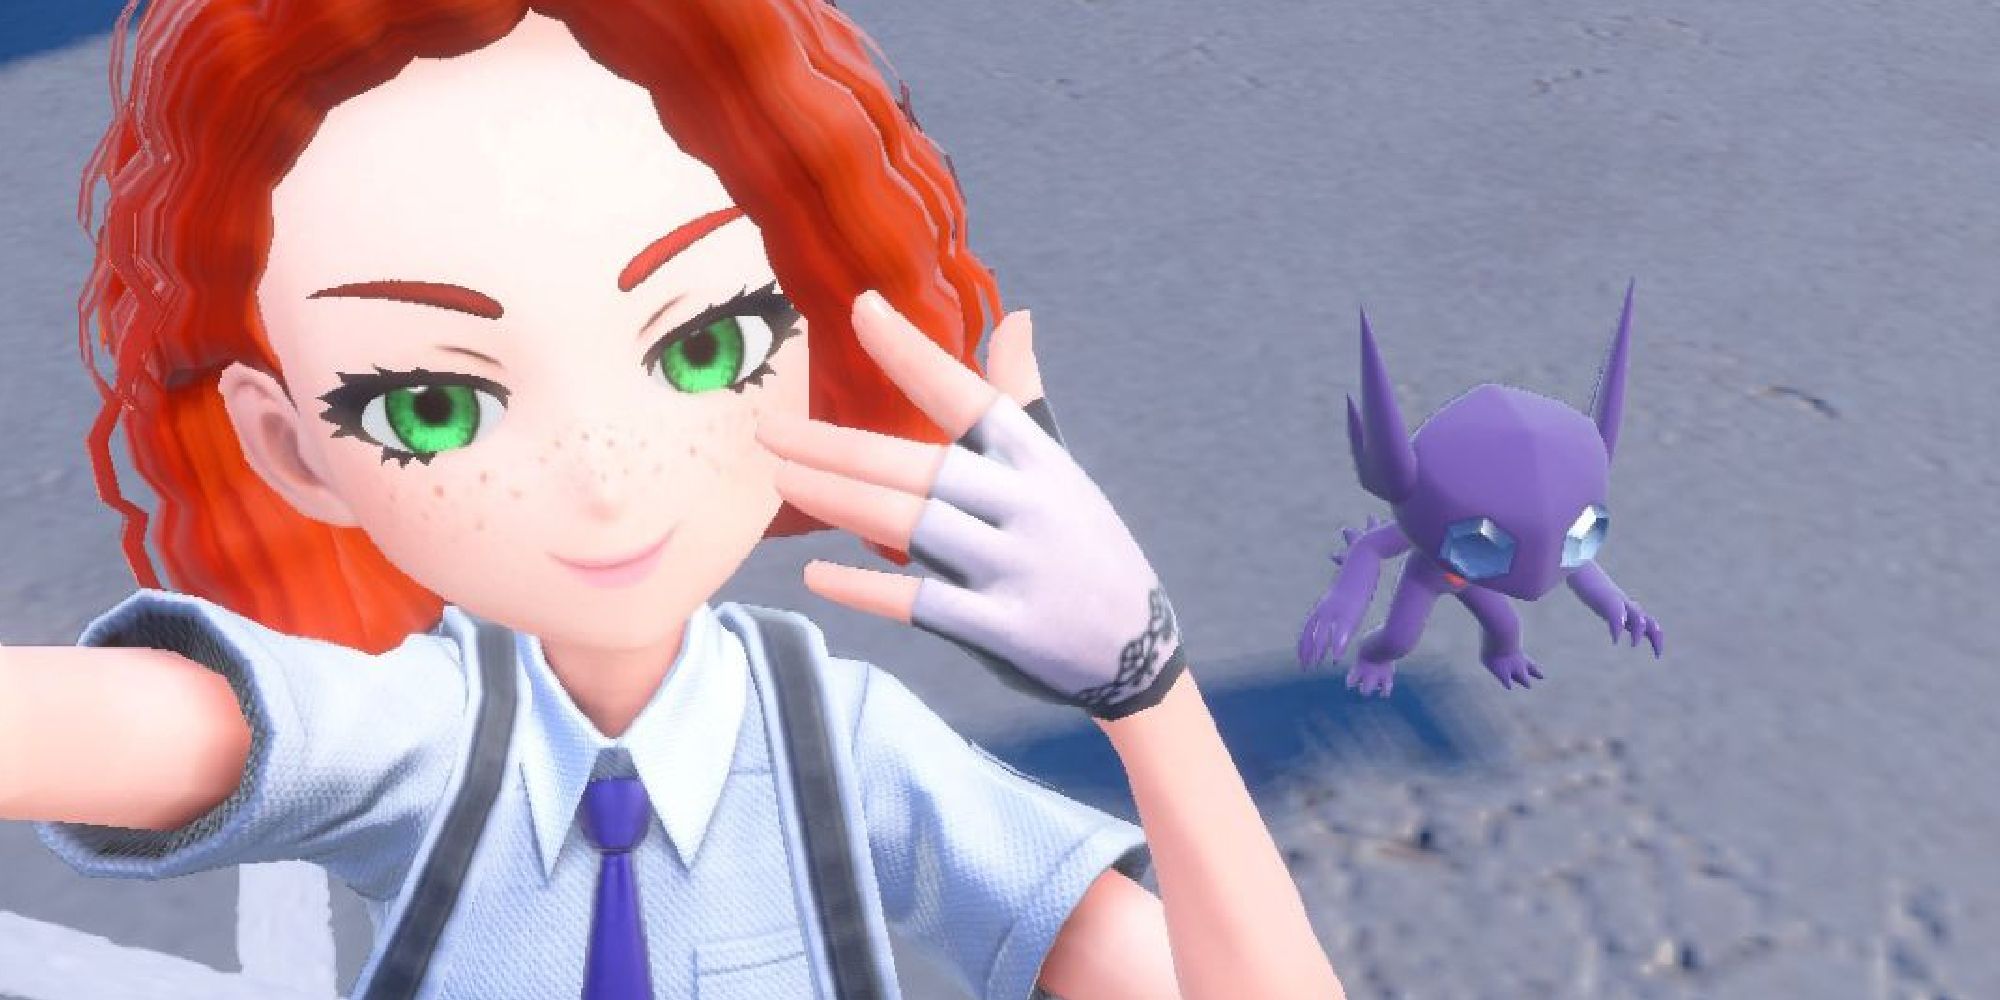 A red-haired player taking a selfie with Sableye